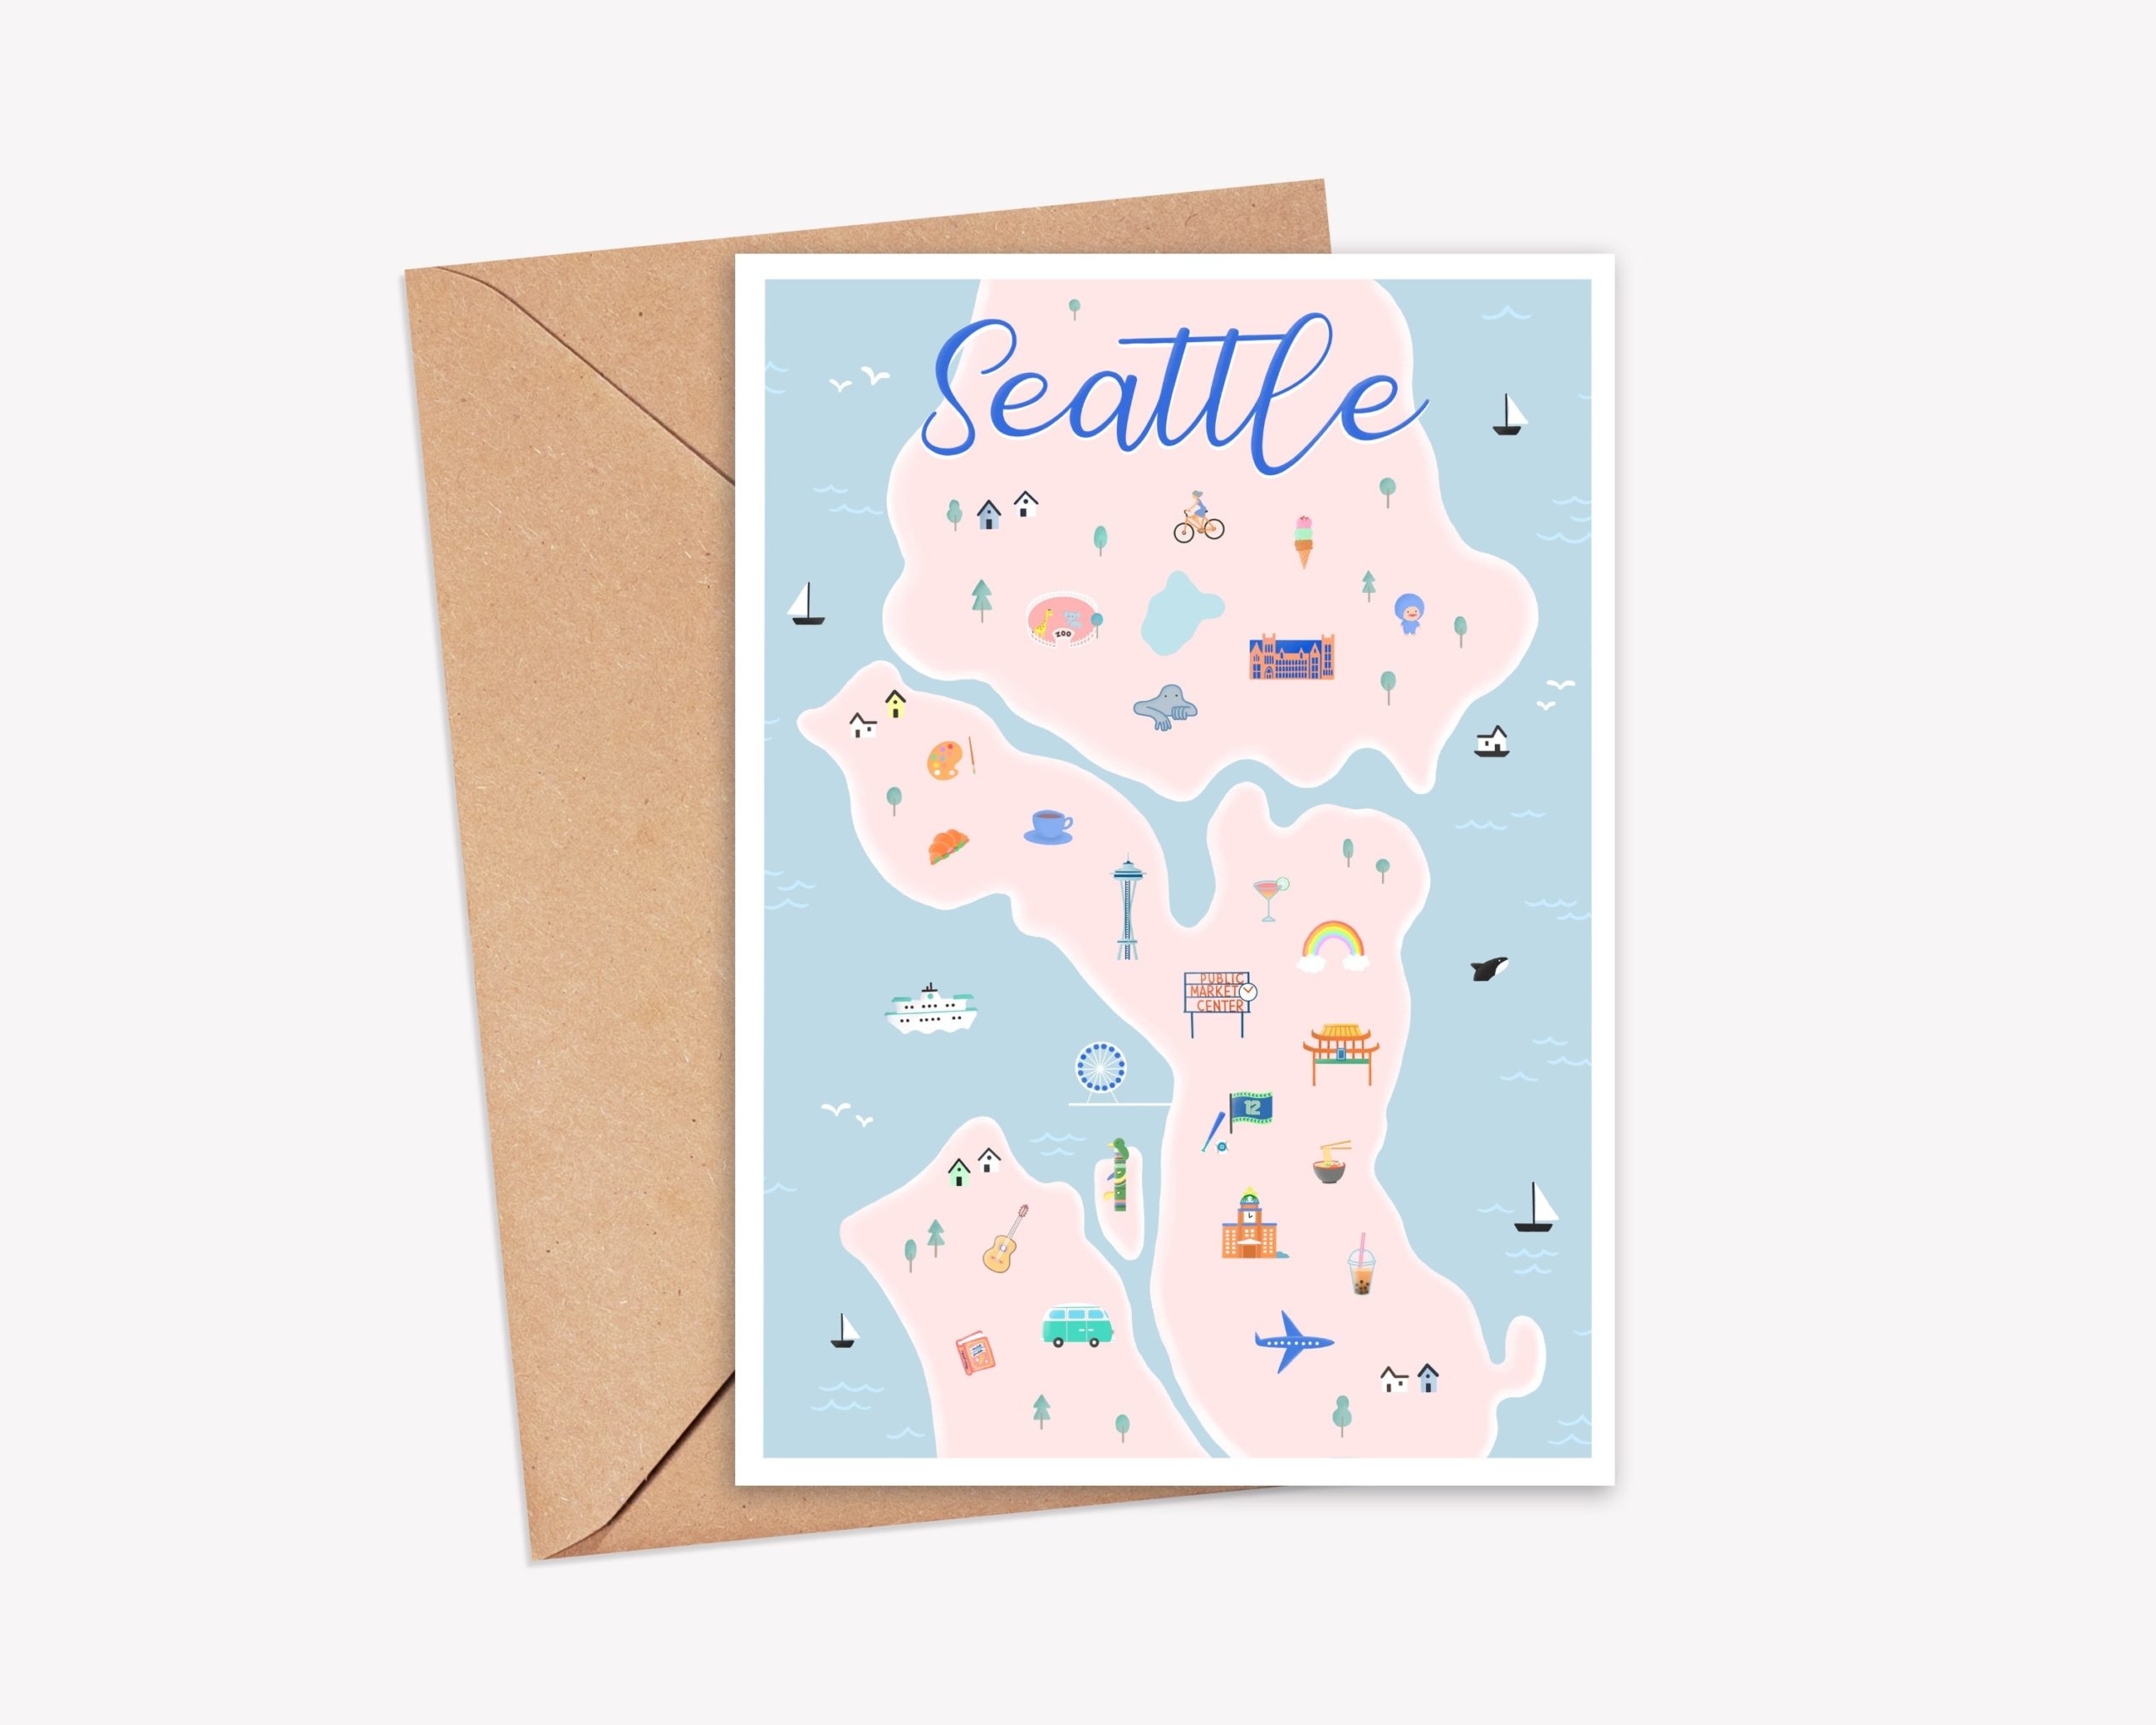 seattle business cards 1